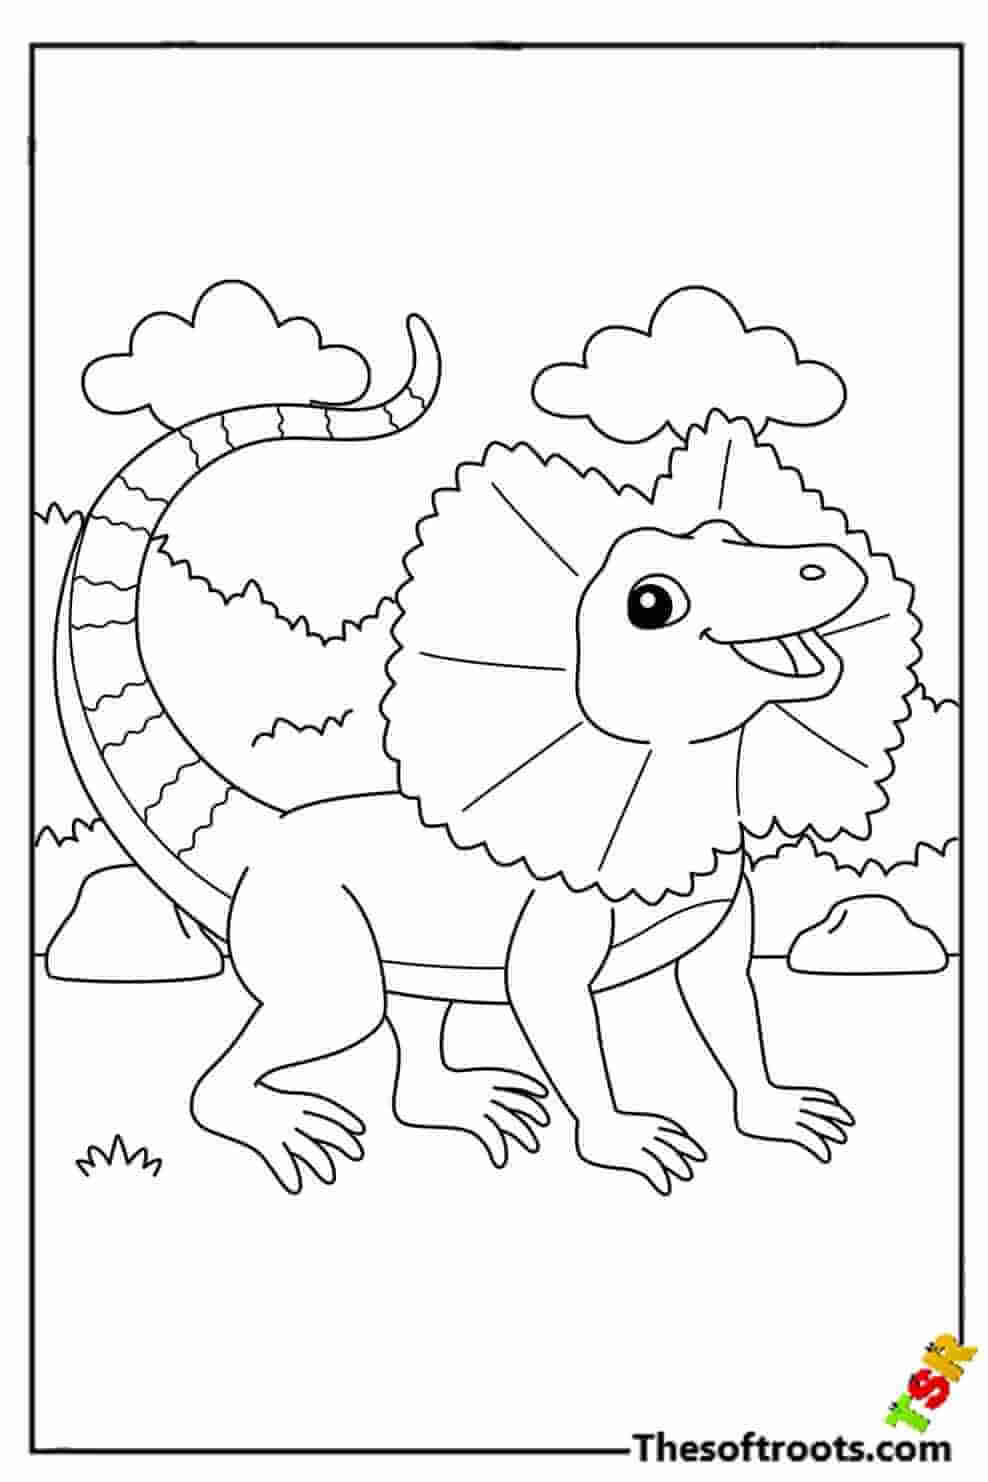 Monster lizard coloring pages